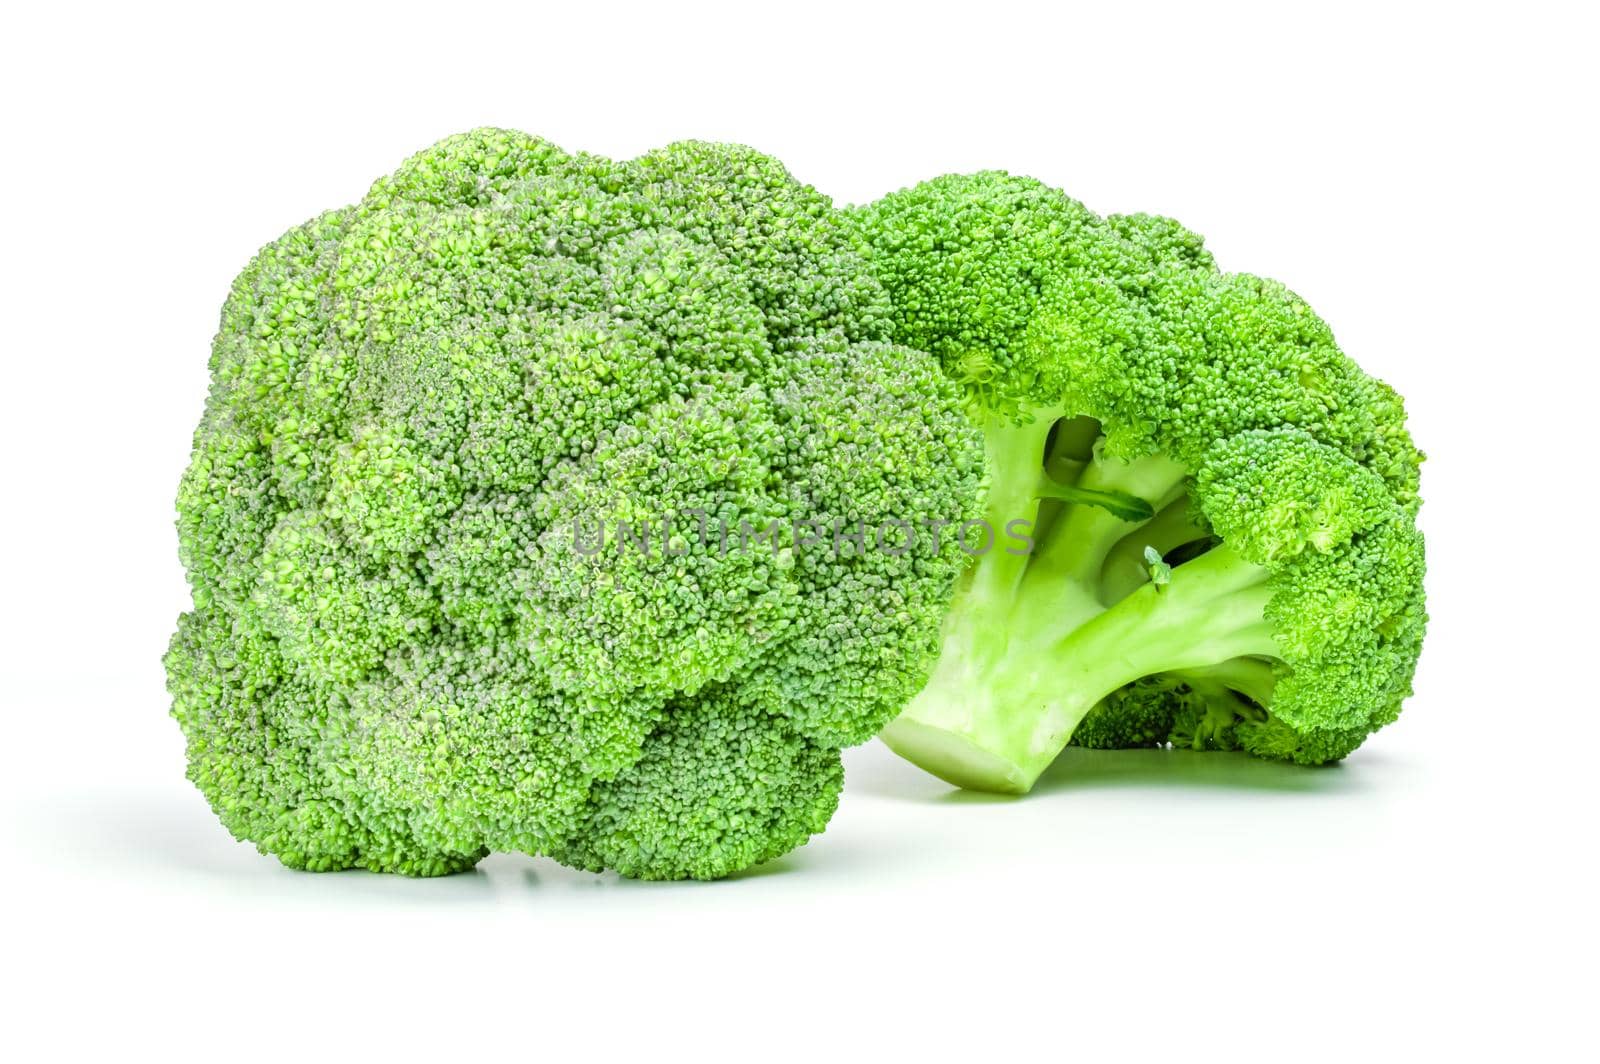 Two ripe broccoli cabbage isolated on white background by Proff